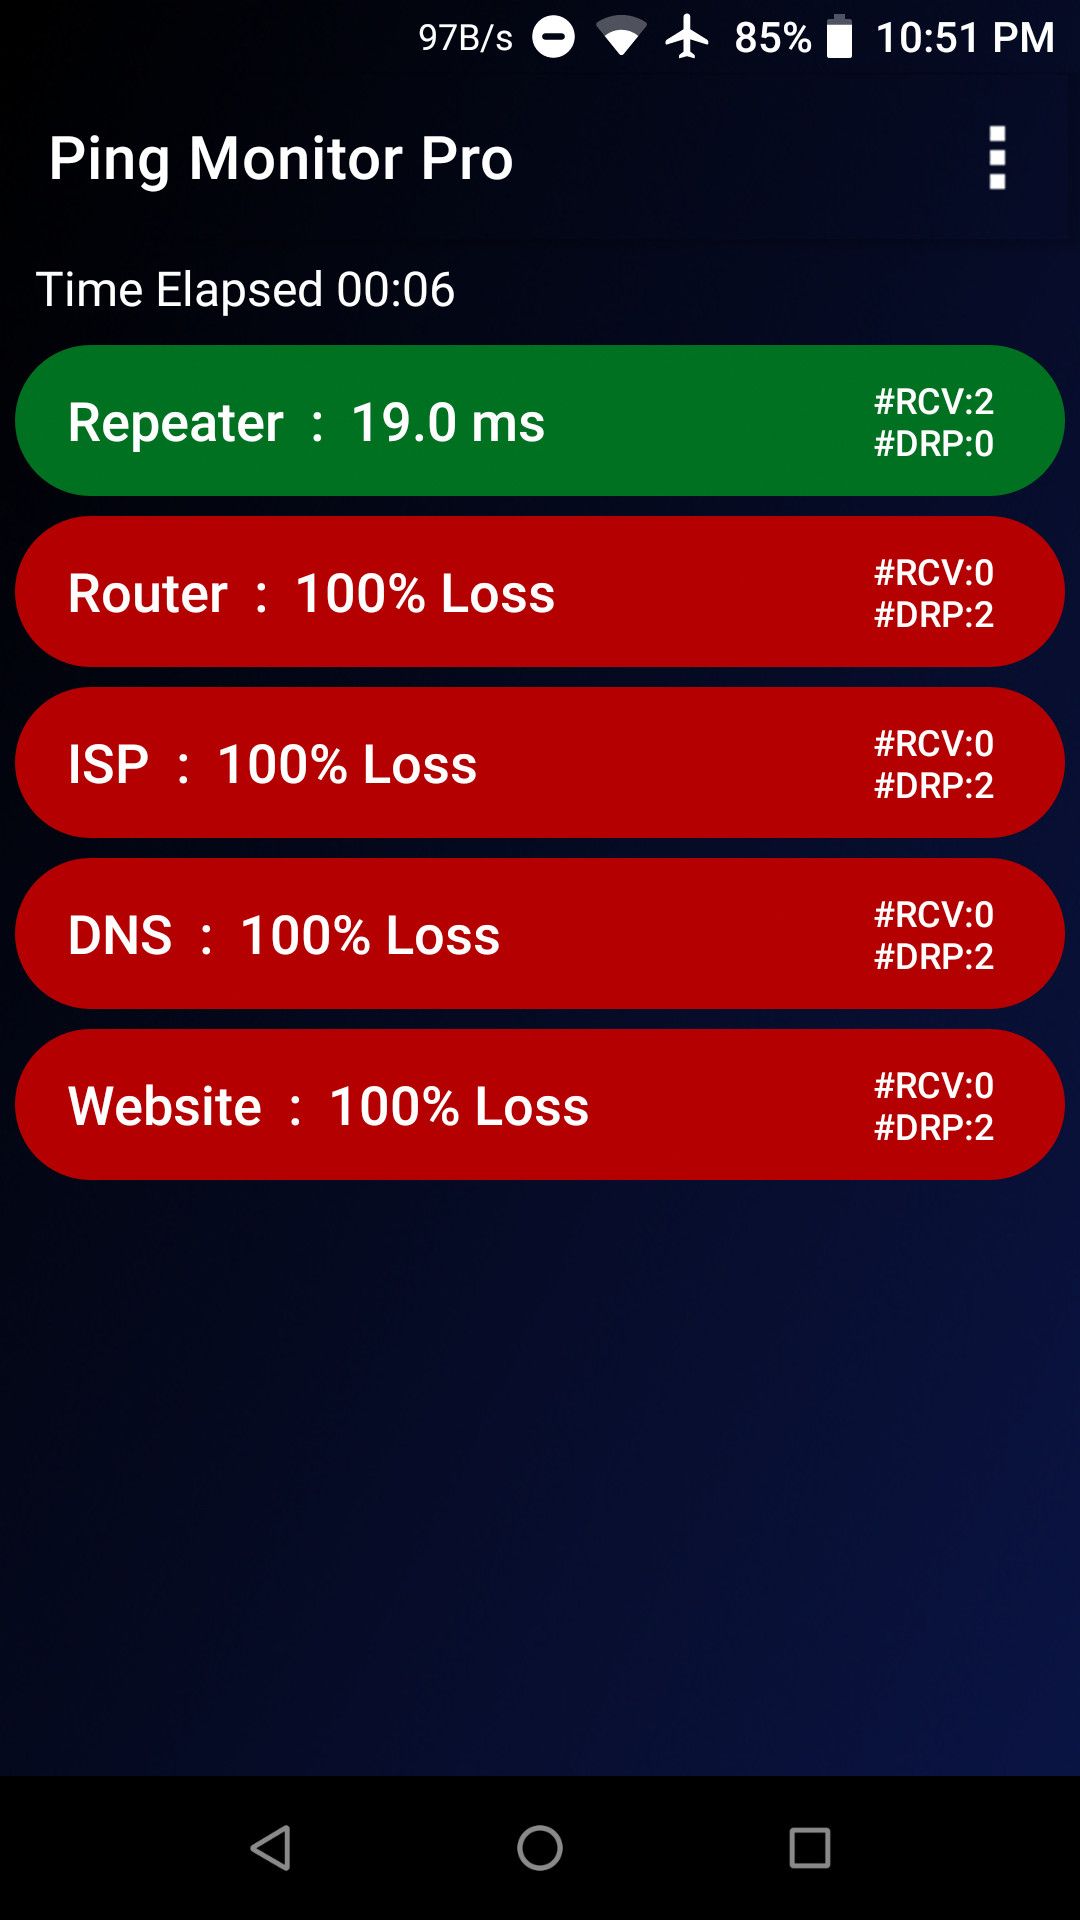 Ping monitor pro showing failure at router end